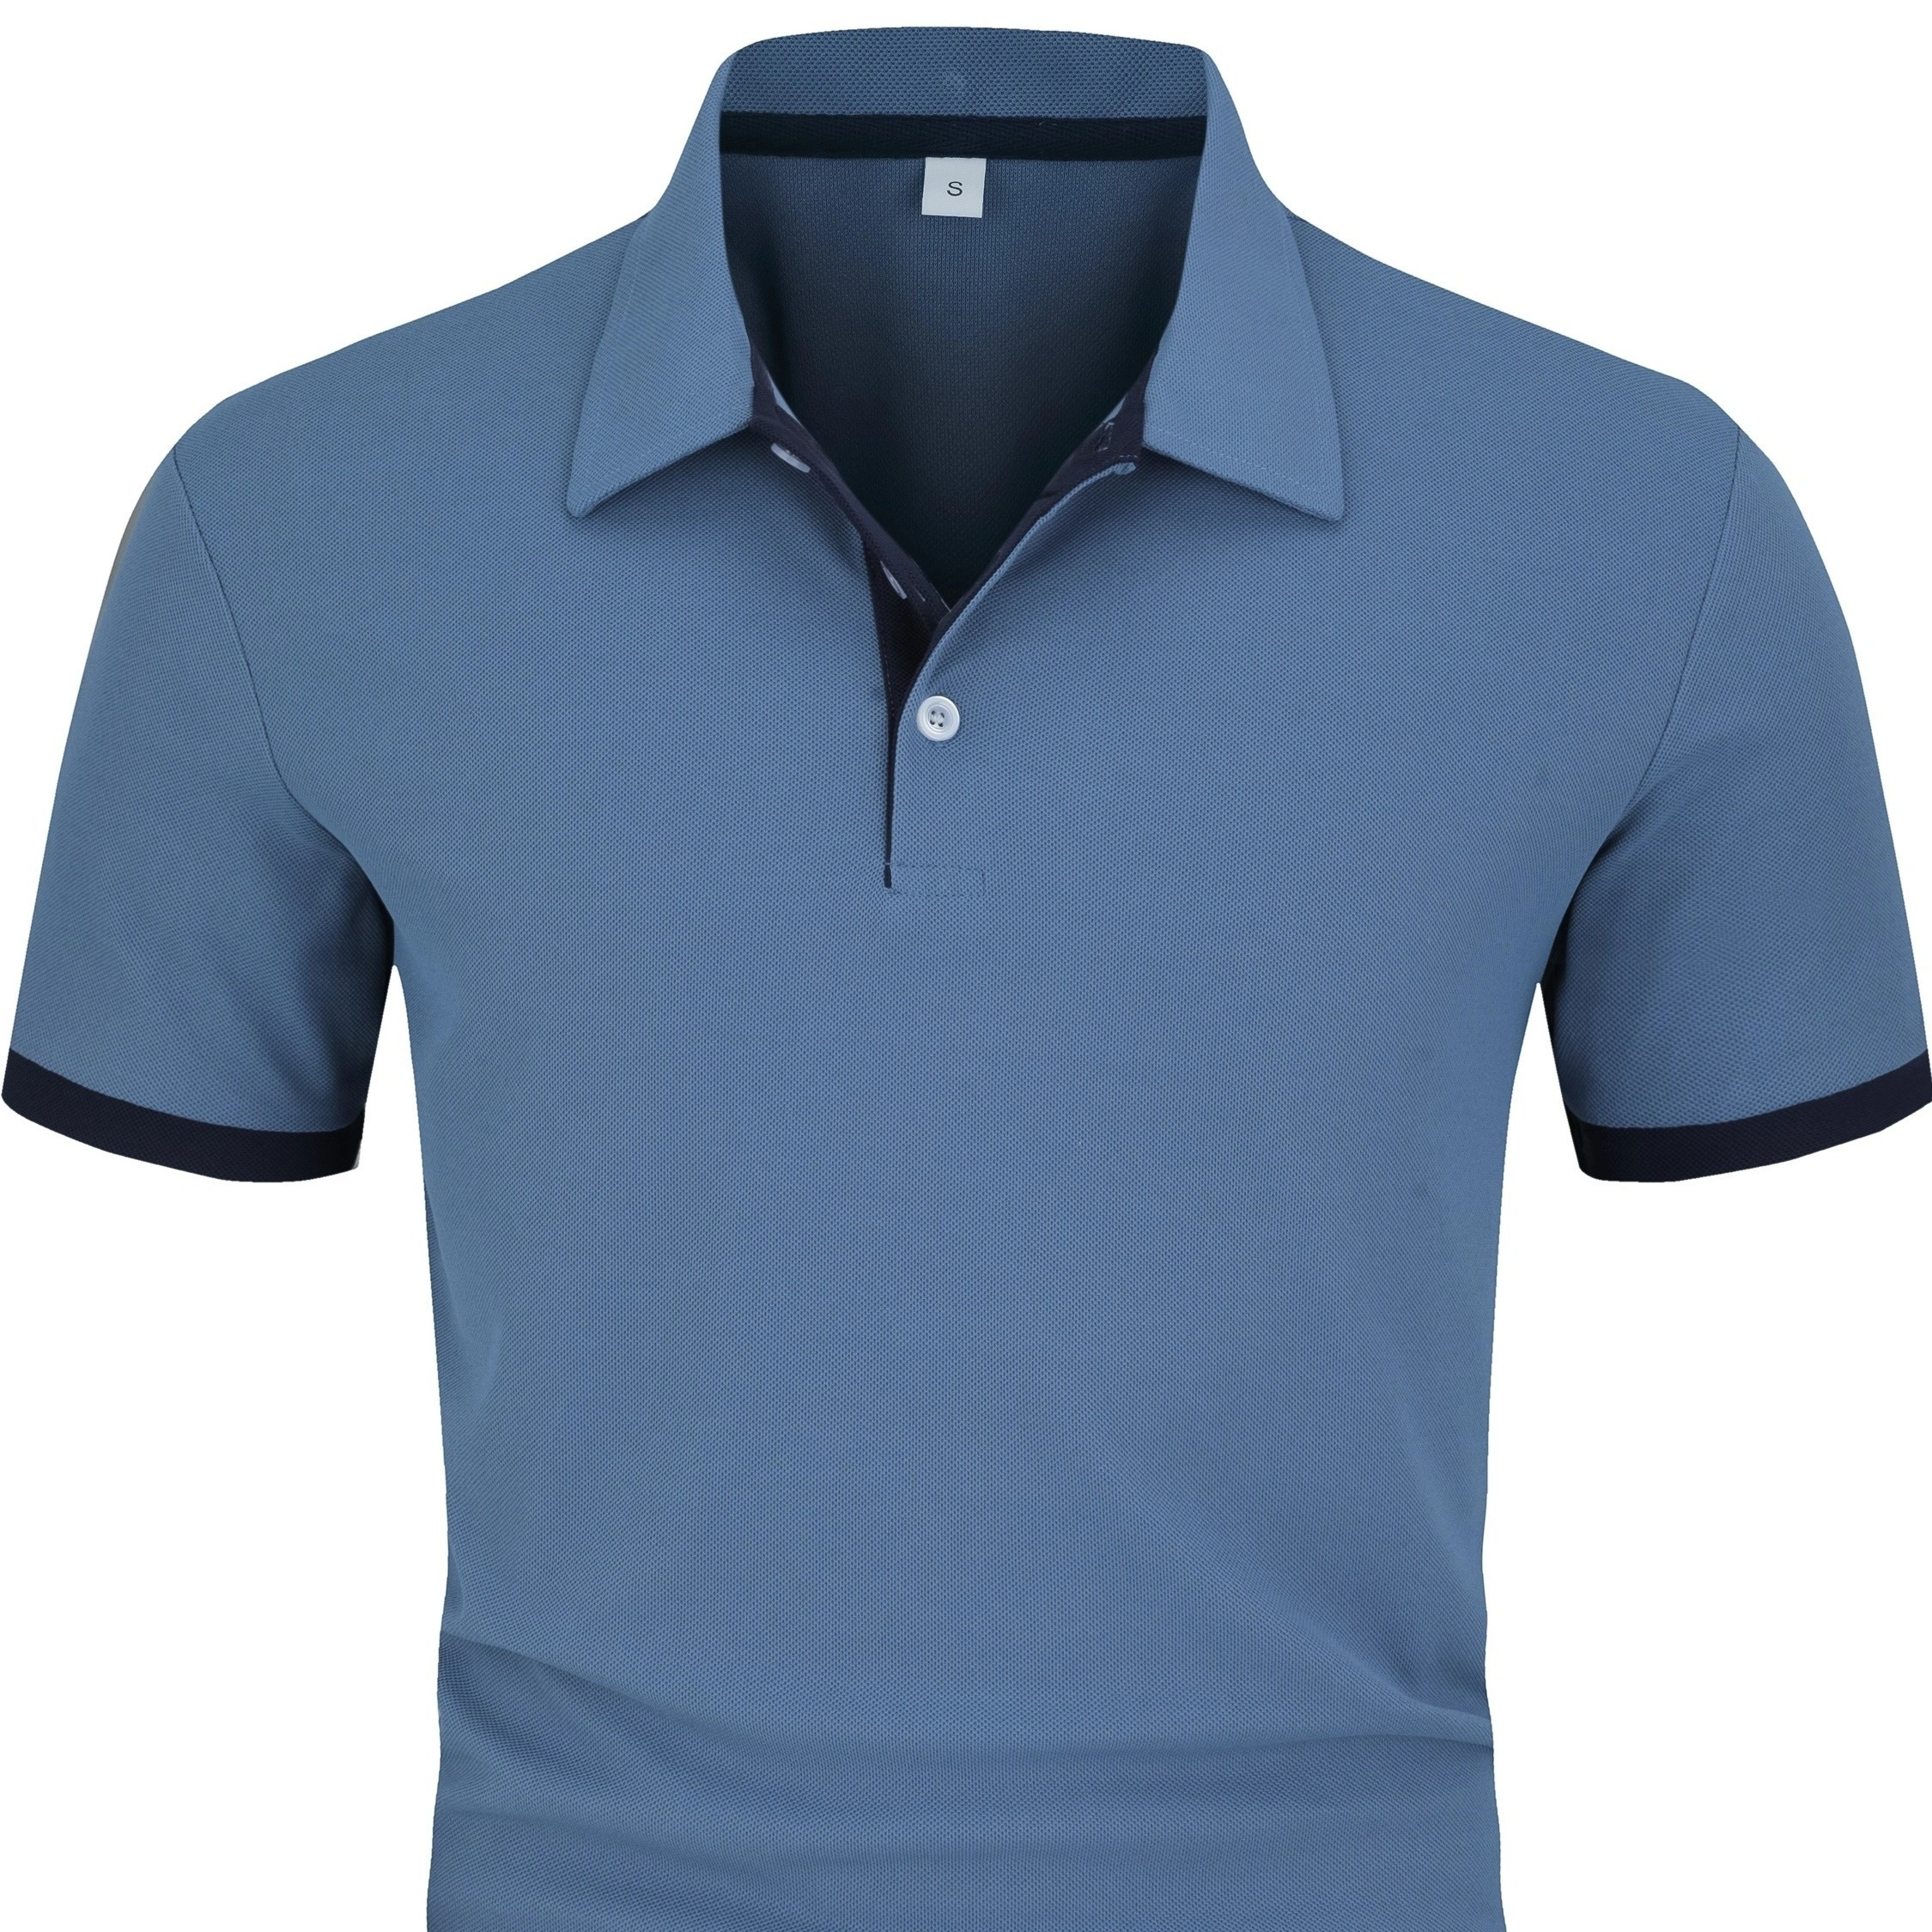 

Men's Golf Shirt, Solid Color Short Sleeve Breathable Tennis Shirt, Business Casual, Moisture Wicking